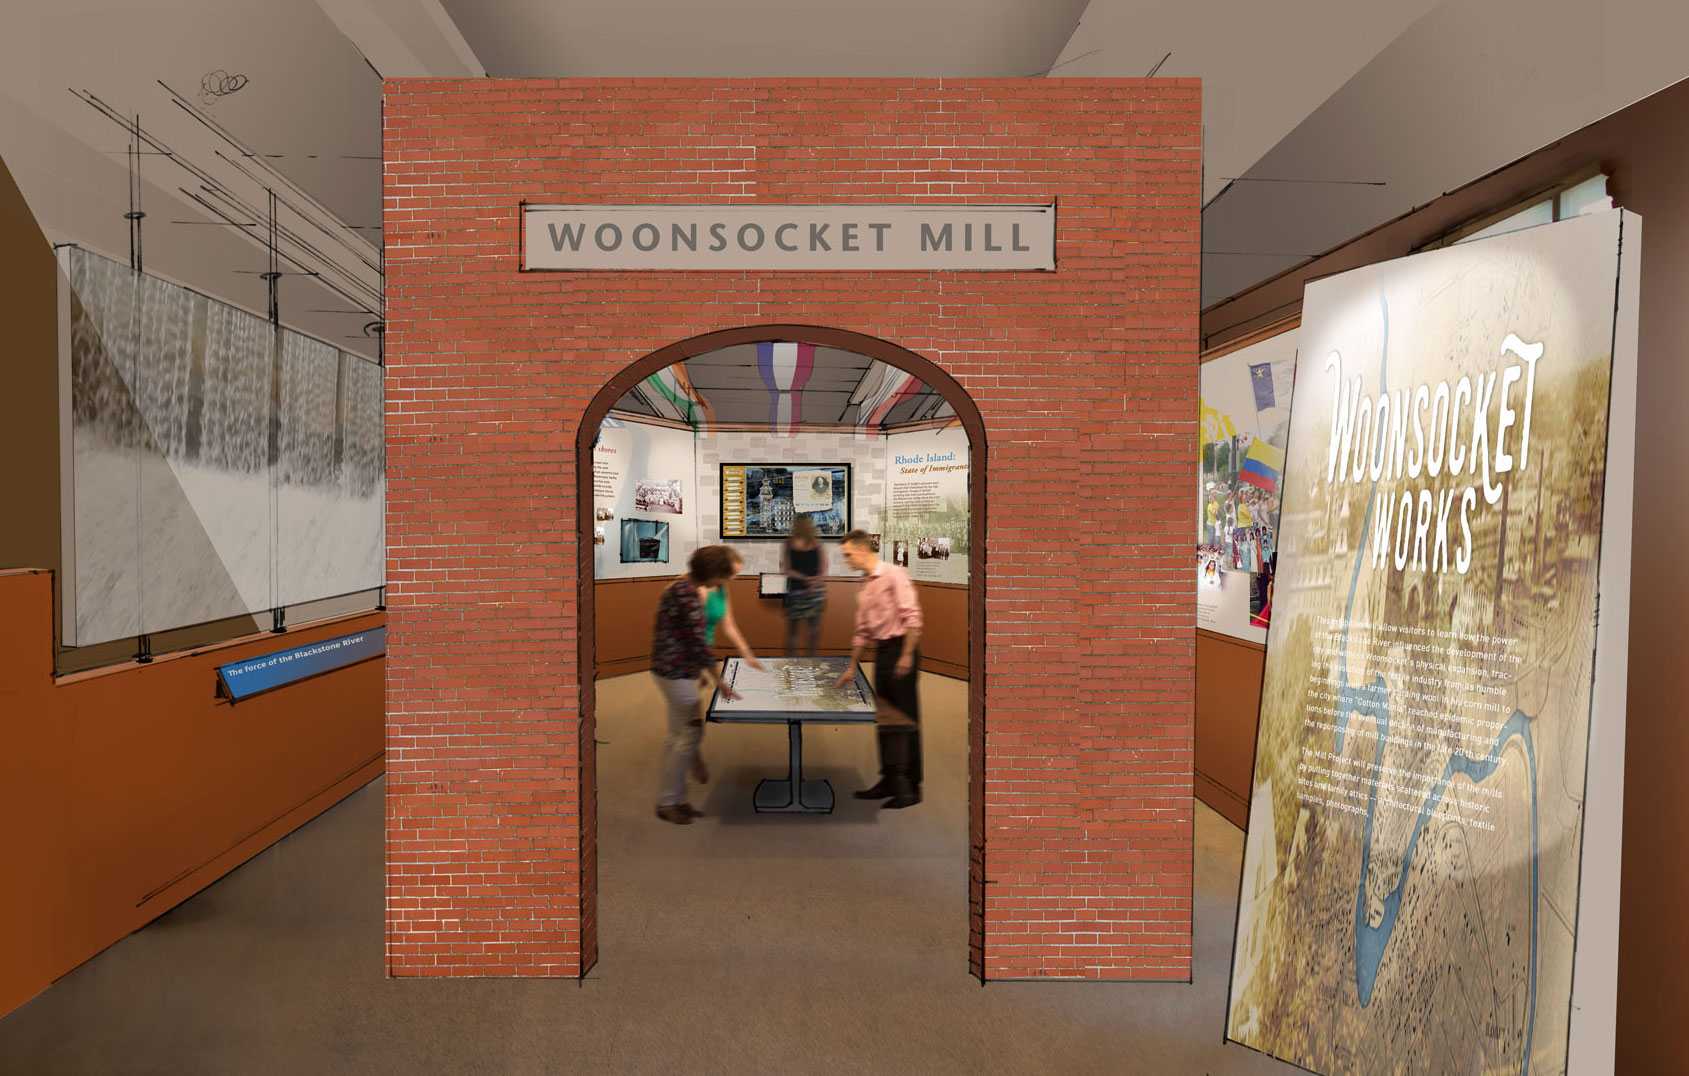 Woonsocket Works a new exhibit under development at the Museum of Work & Culture